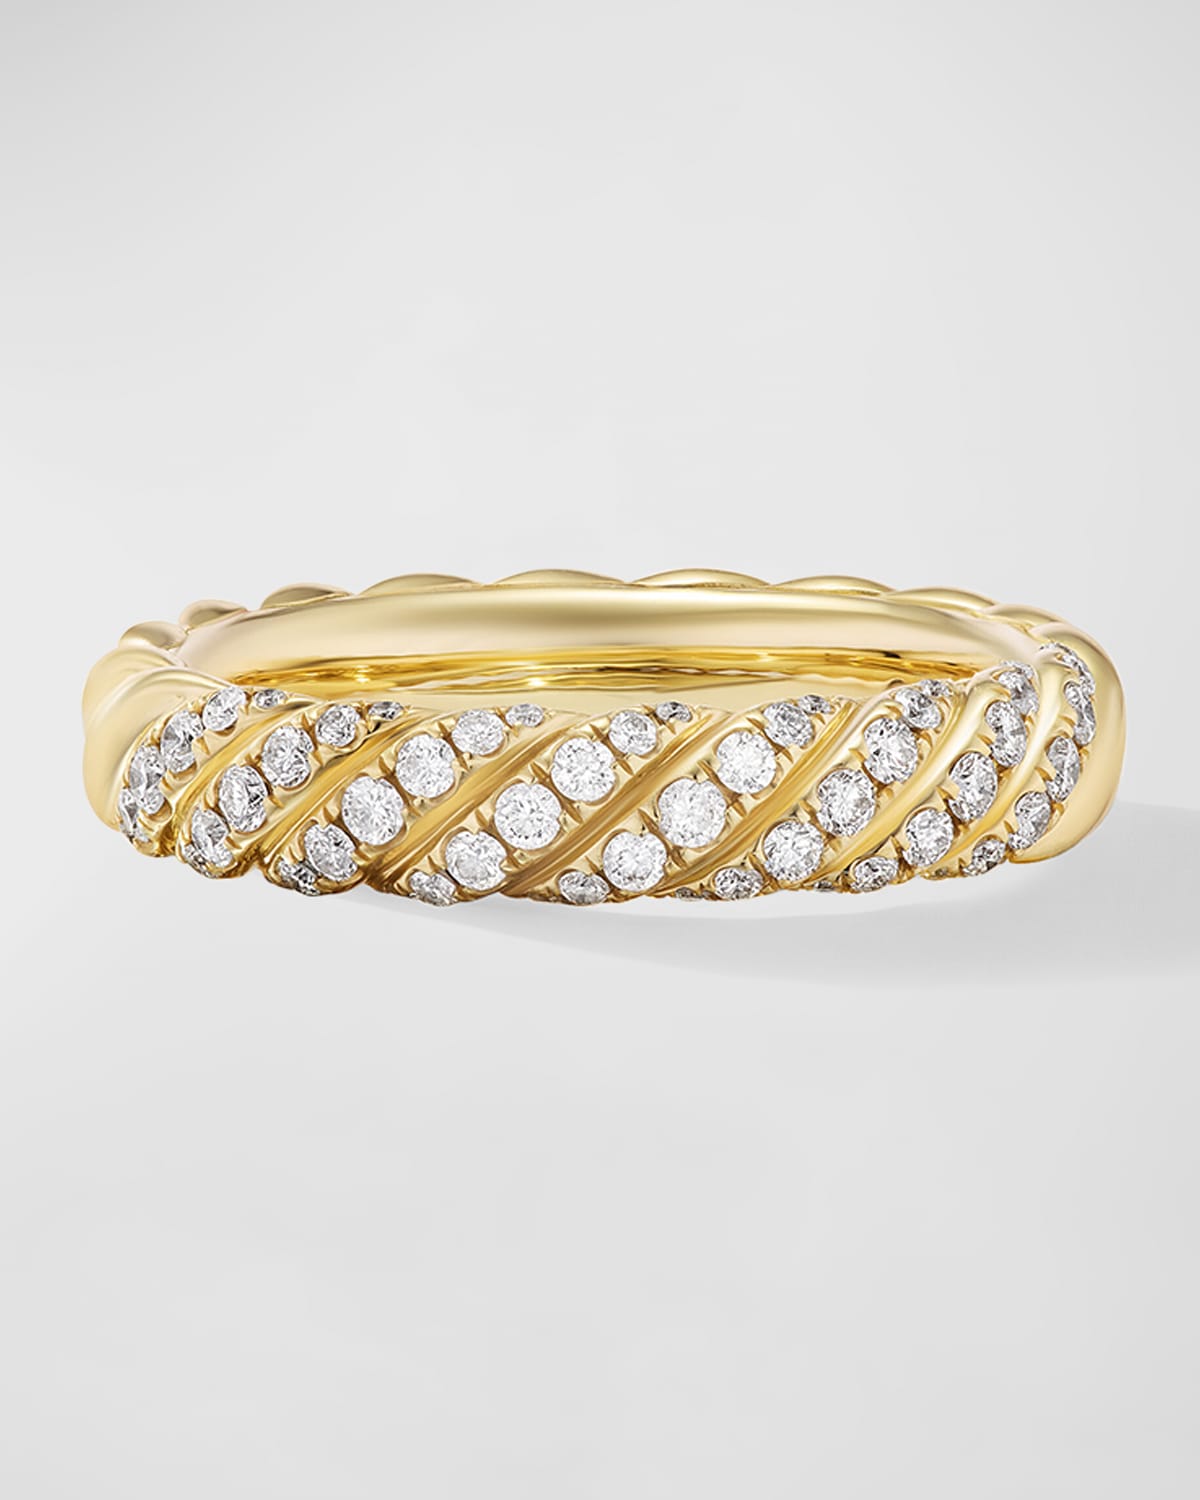 David Yurman Sculpted Cable Band Ring with Diamonds in 18K Gold, 4.5mm, Size 7